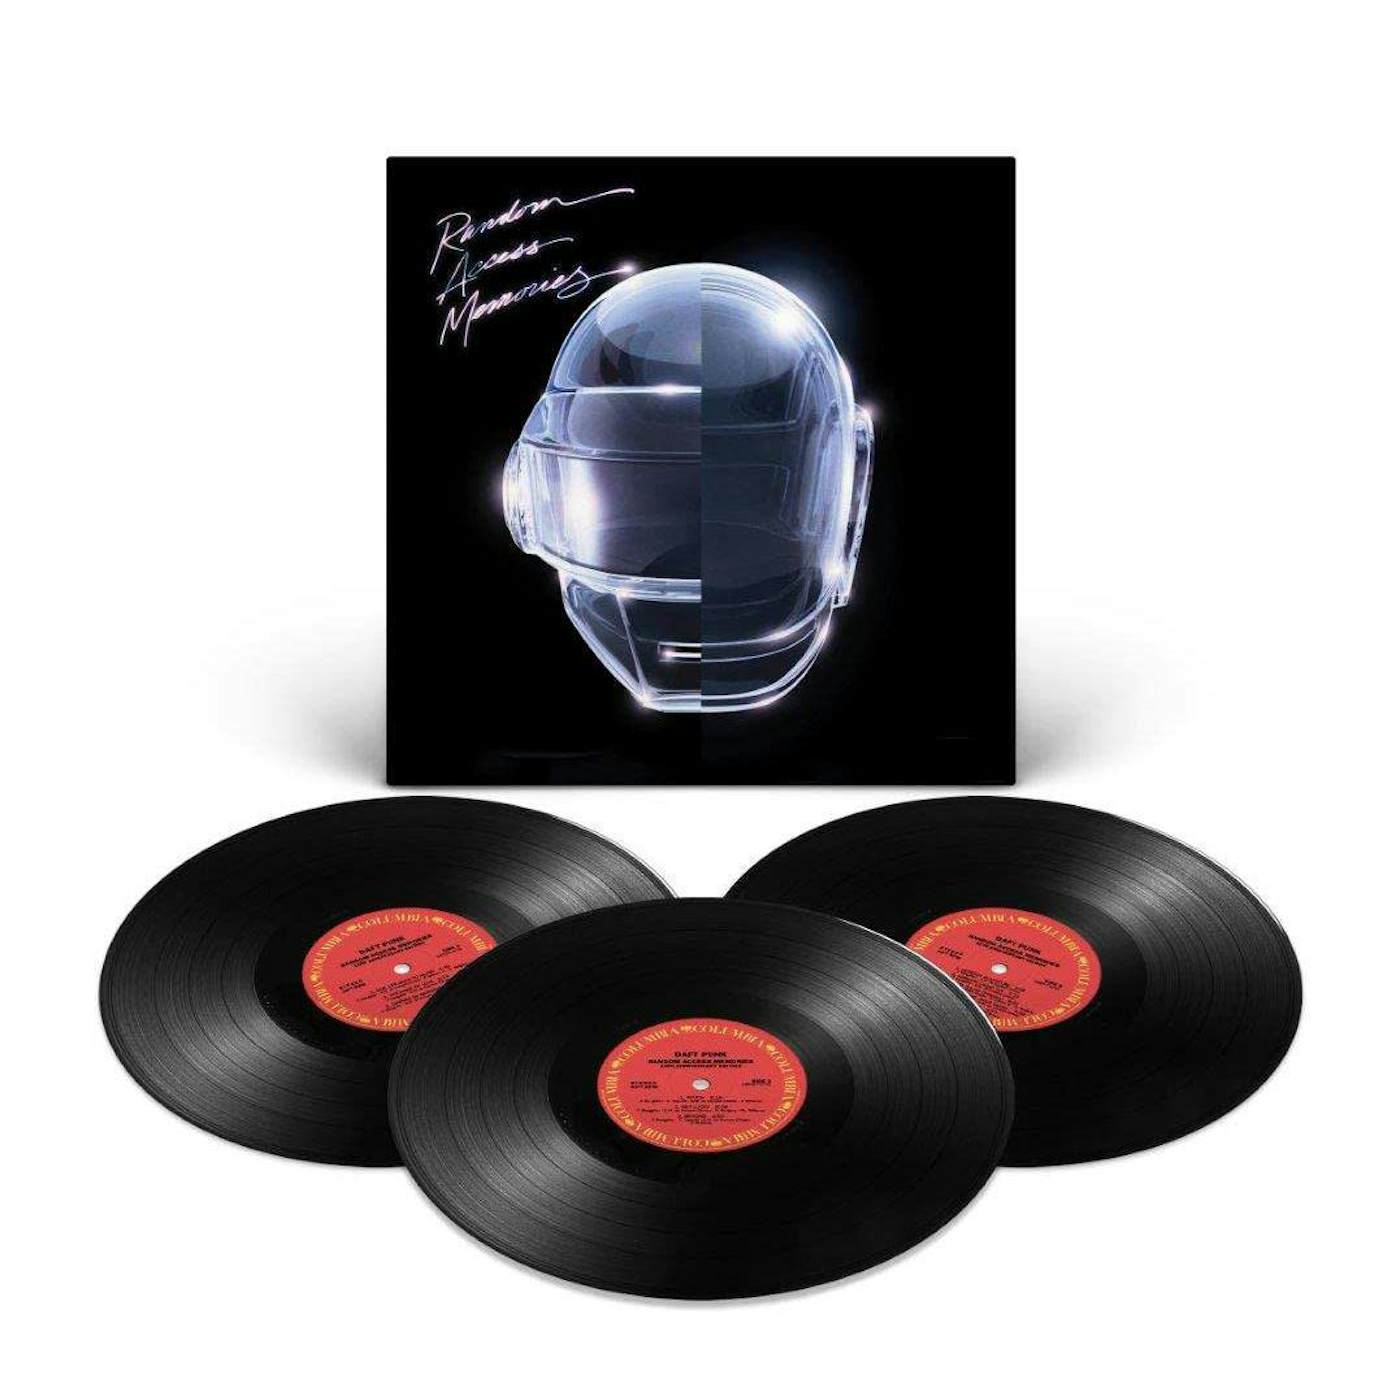 10 Unique Daft Punk Collectibles to Keep the Robots' Spirit Alive in Your  Home -  - The Latest Electronic Dance Music News, Reviews & Artists